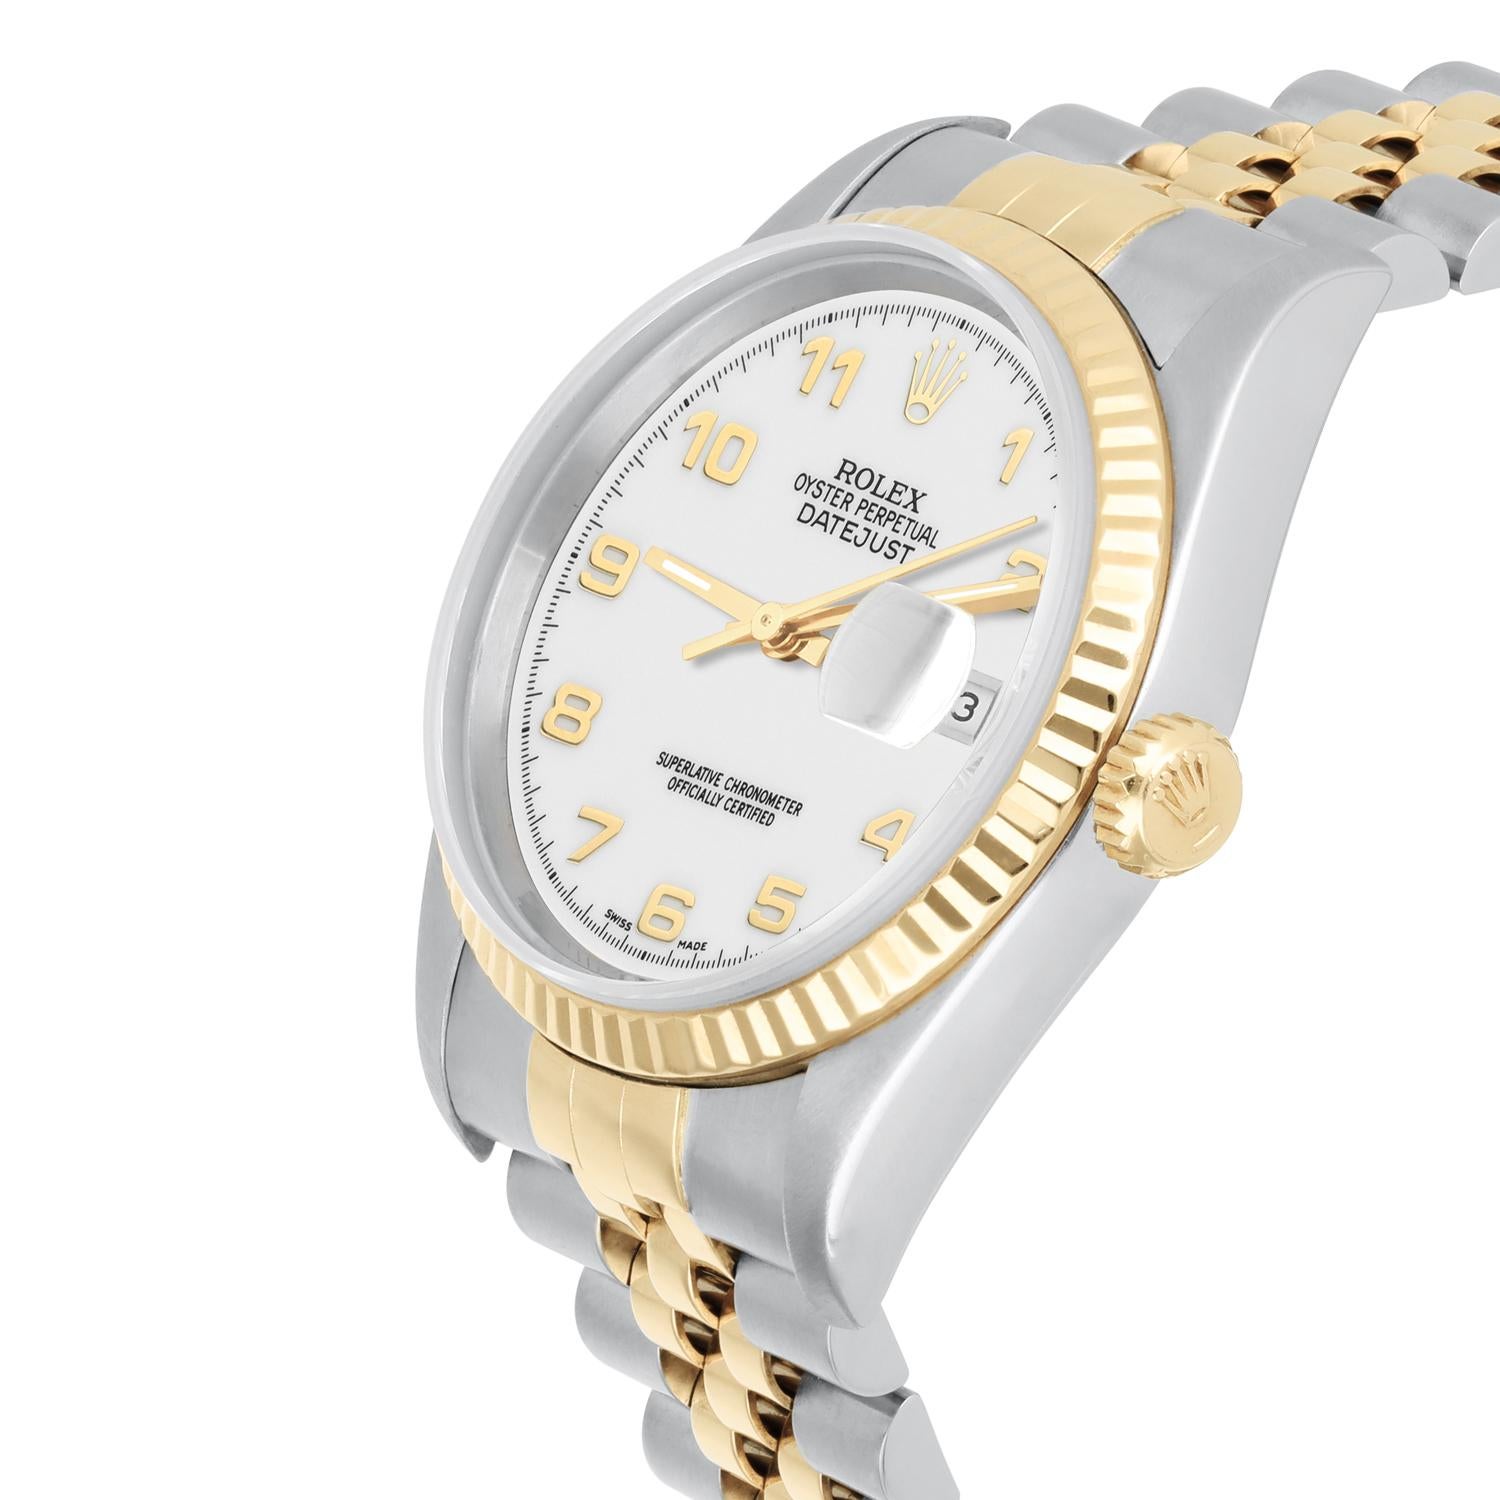 Modern Rolex Datejust 36mm Two Tone White Arabic Dial Jubilee 16233 Circa 2000 For Sale